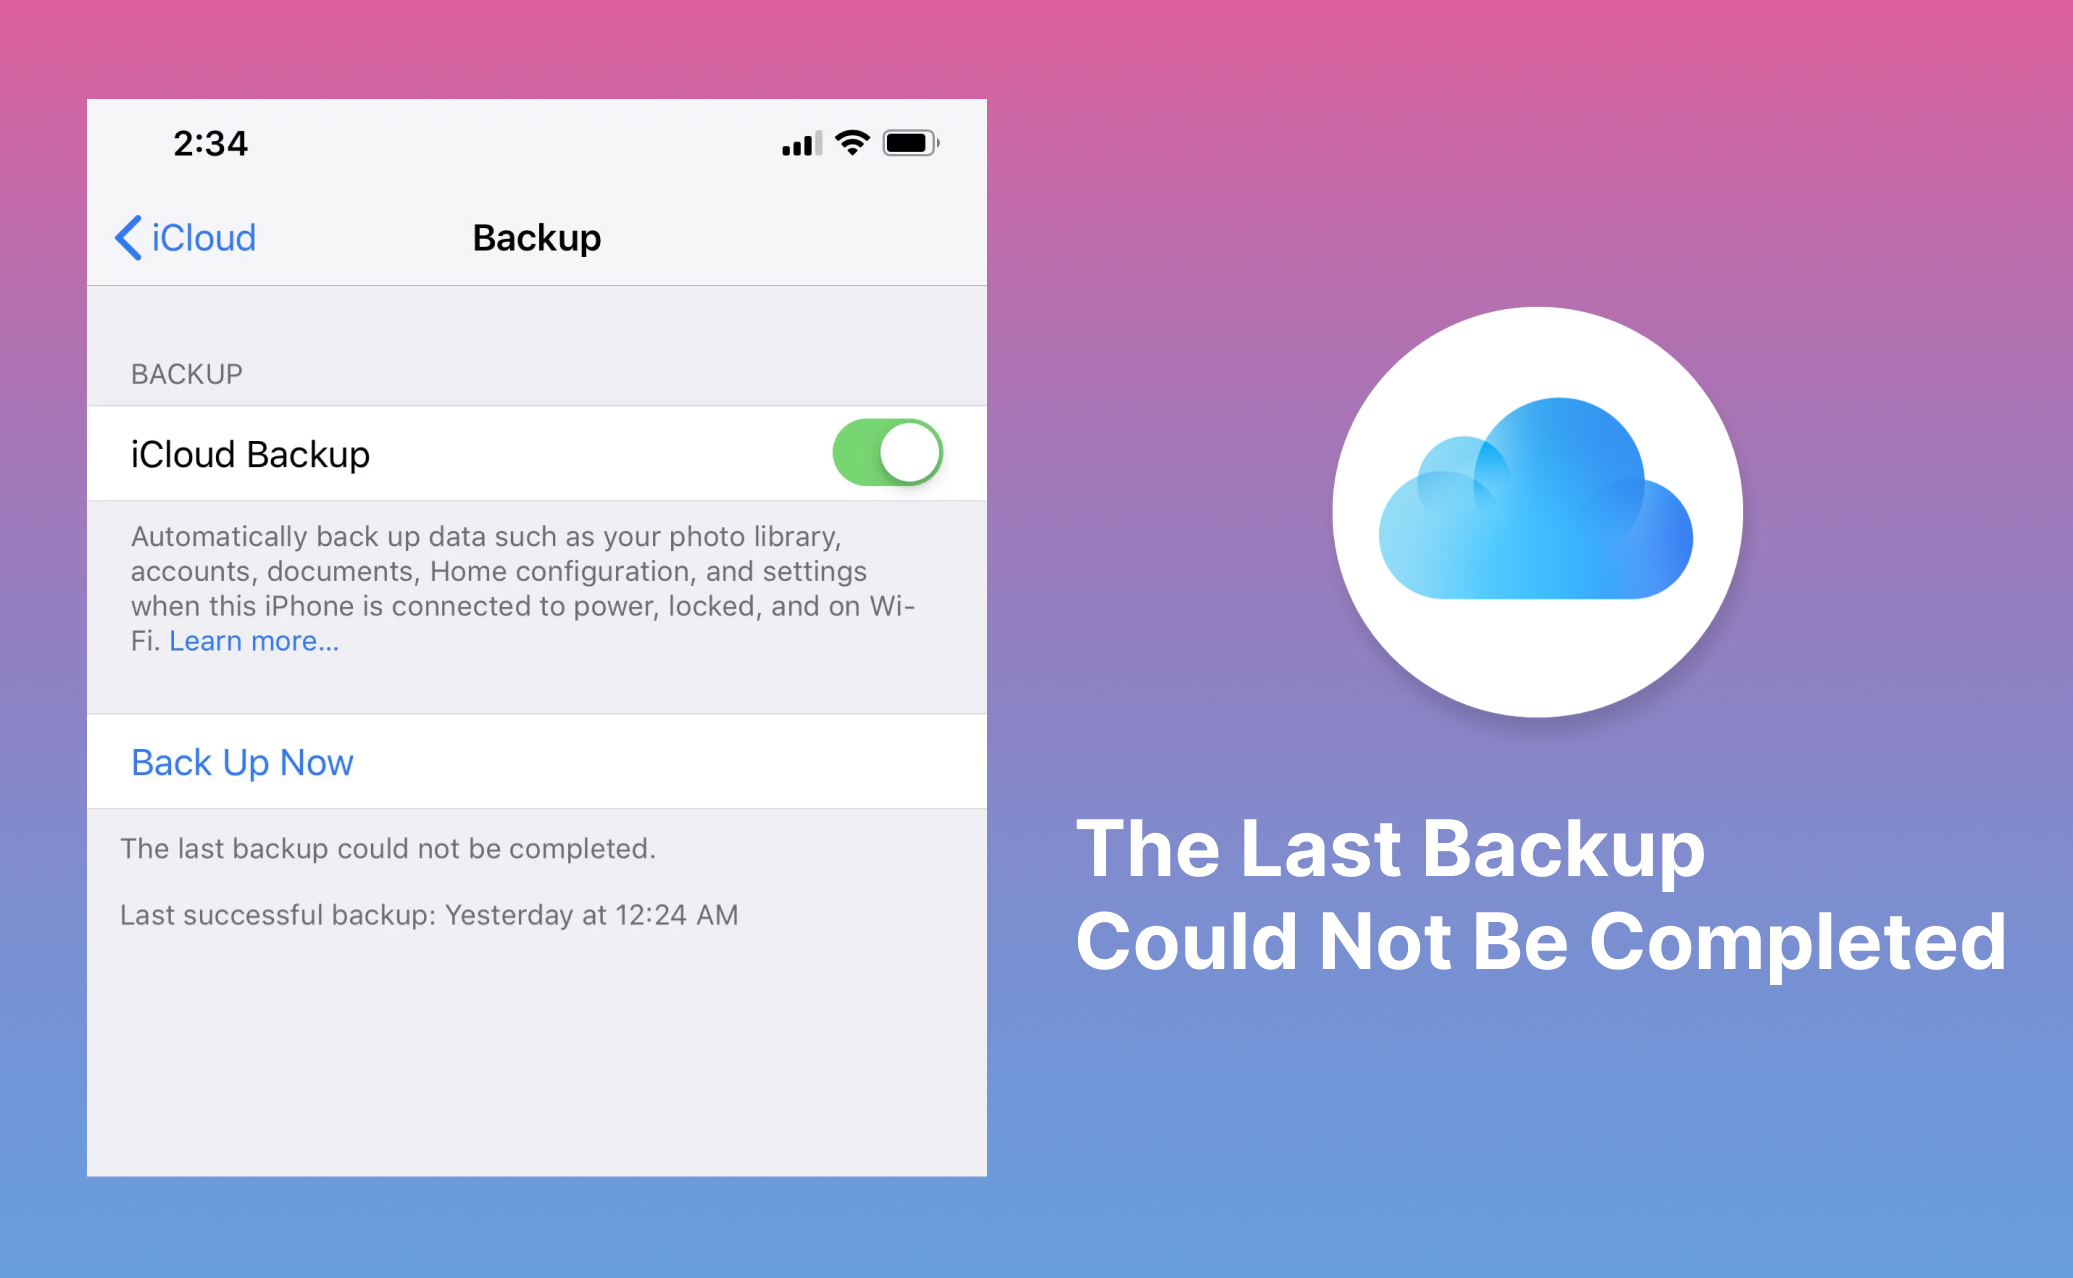 How to Solve the Last Backup Could Not Be Completed Issue